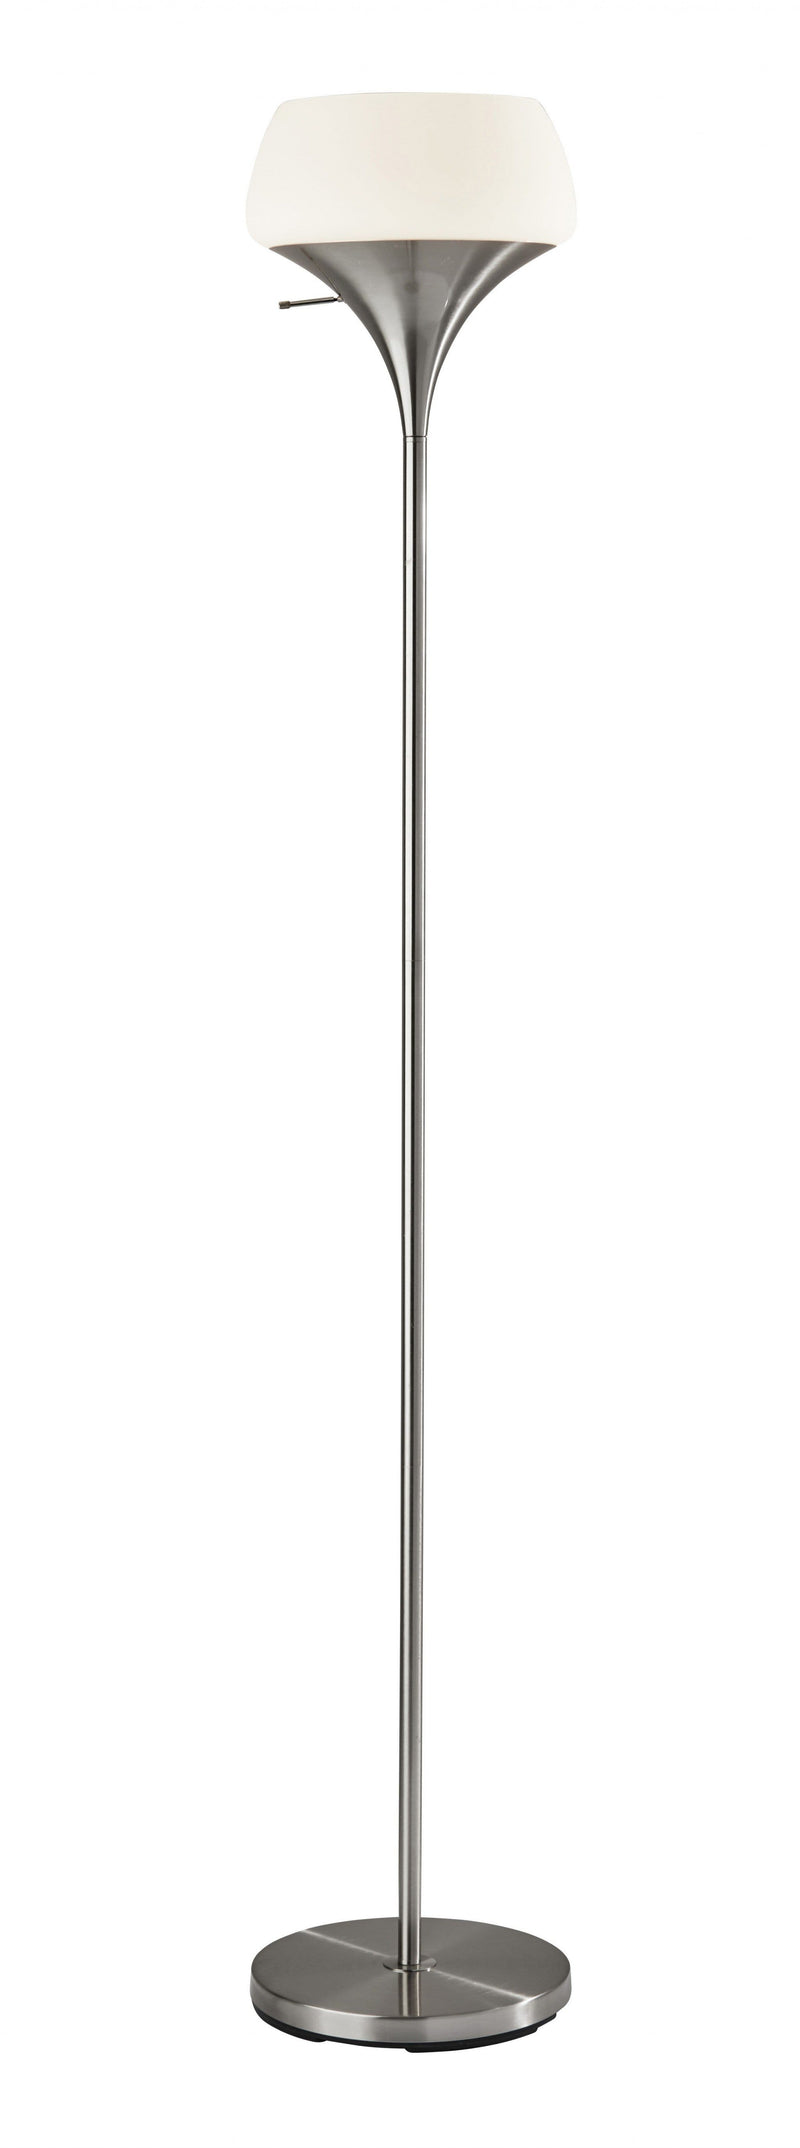 Lamps Torchiere Lamp - 12" X 12" X 69.5" Brushed steel Metal Torchiere HomeRoots